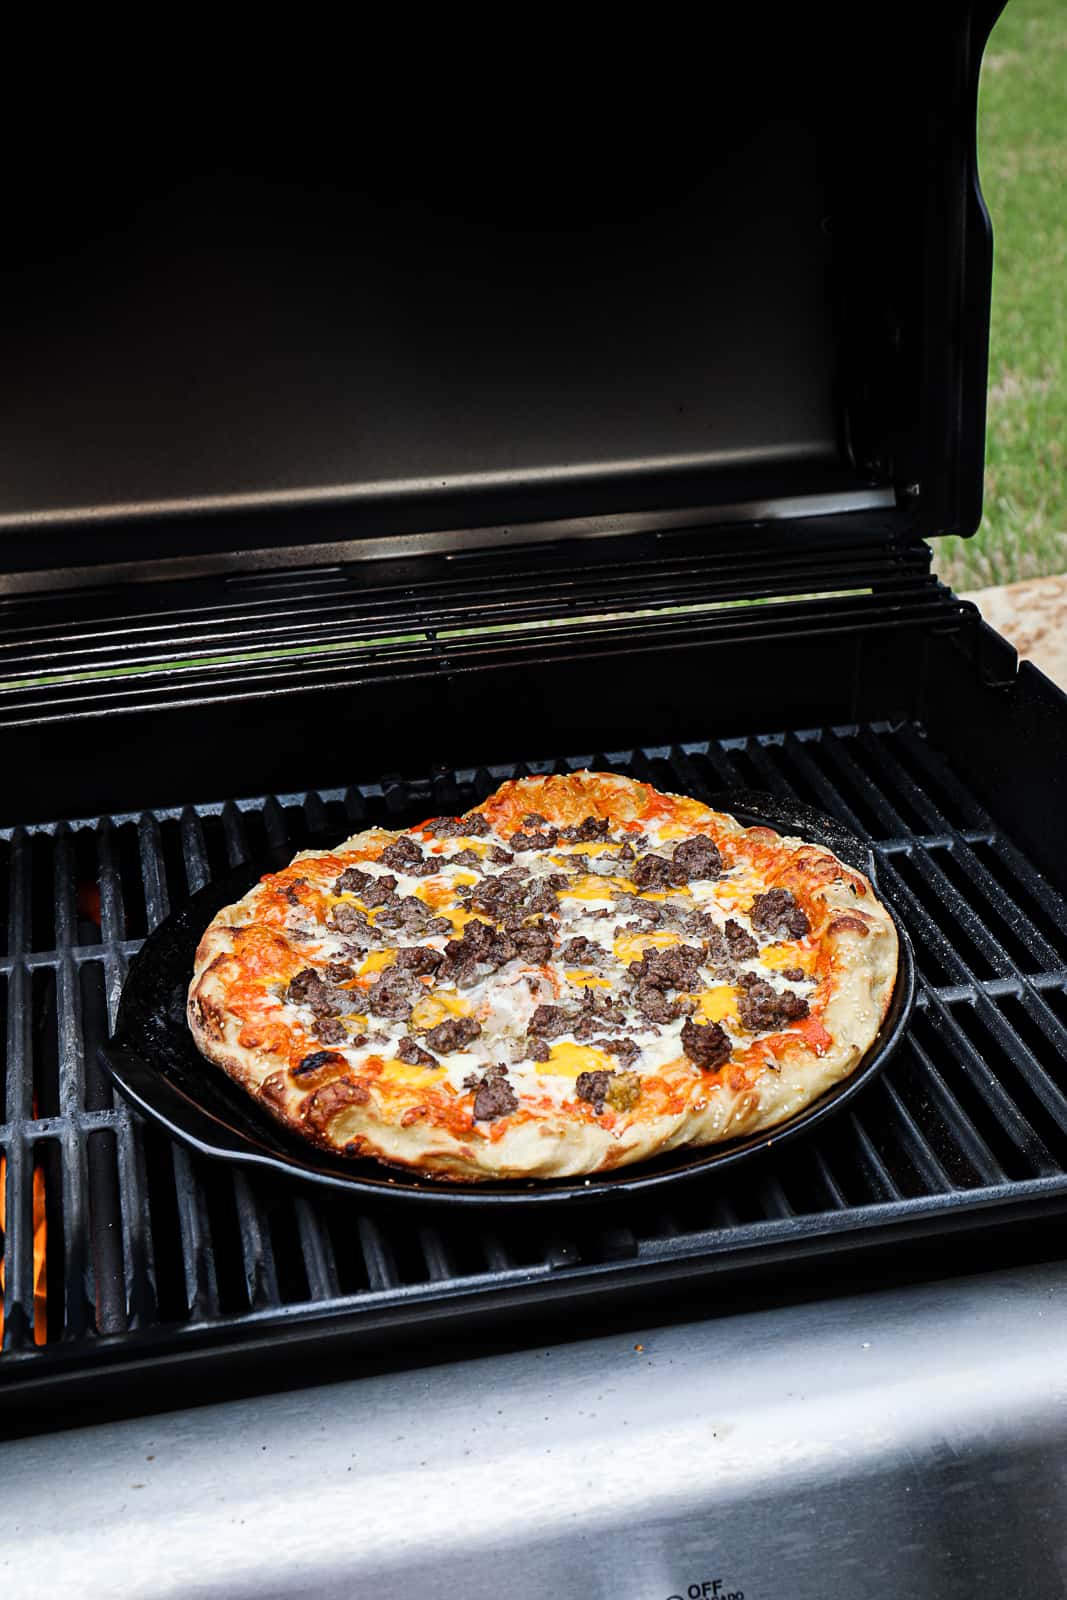 Grilling Pizza with cheeseburger toppings including mustard and pickles